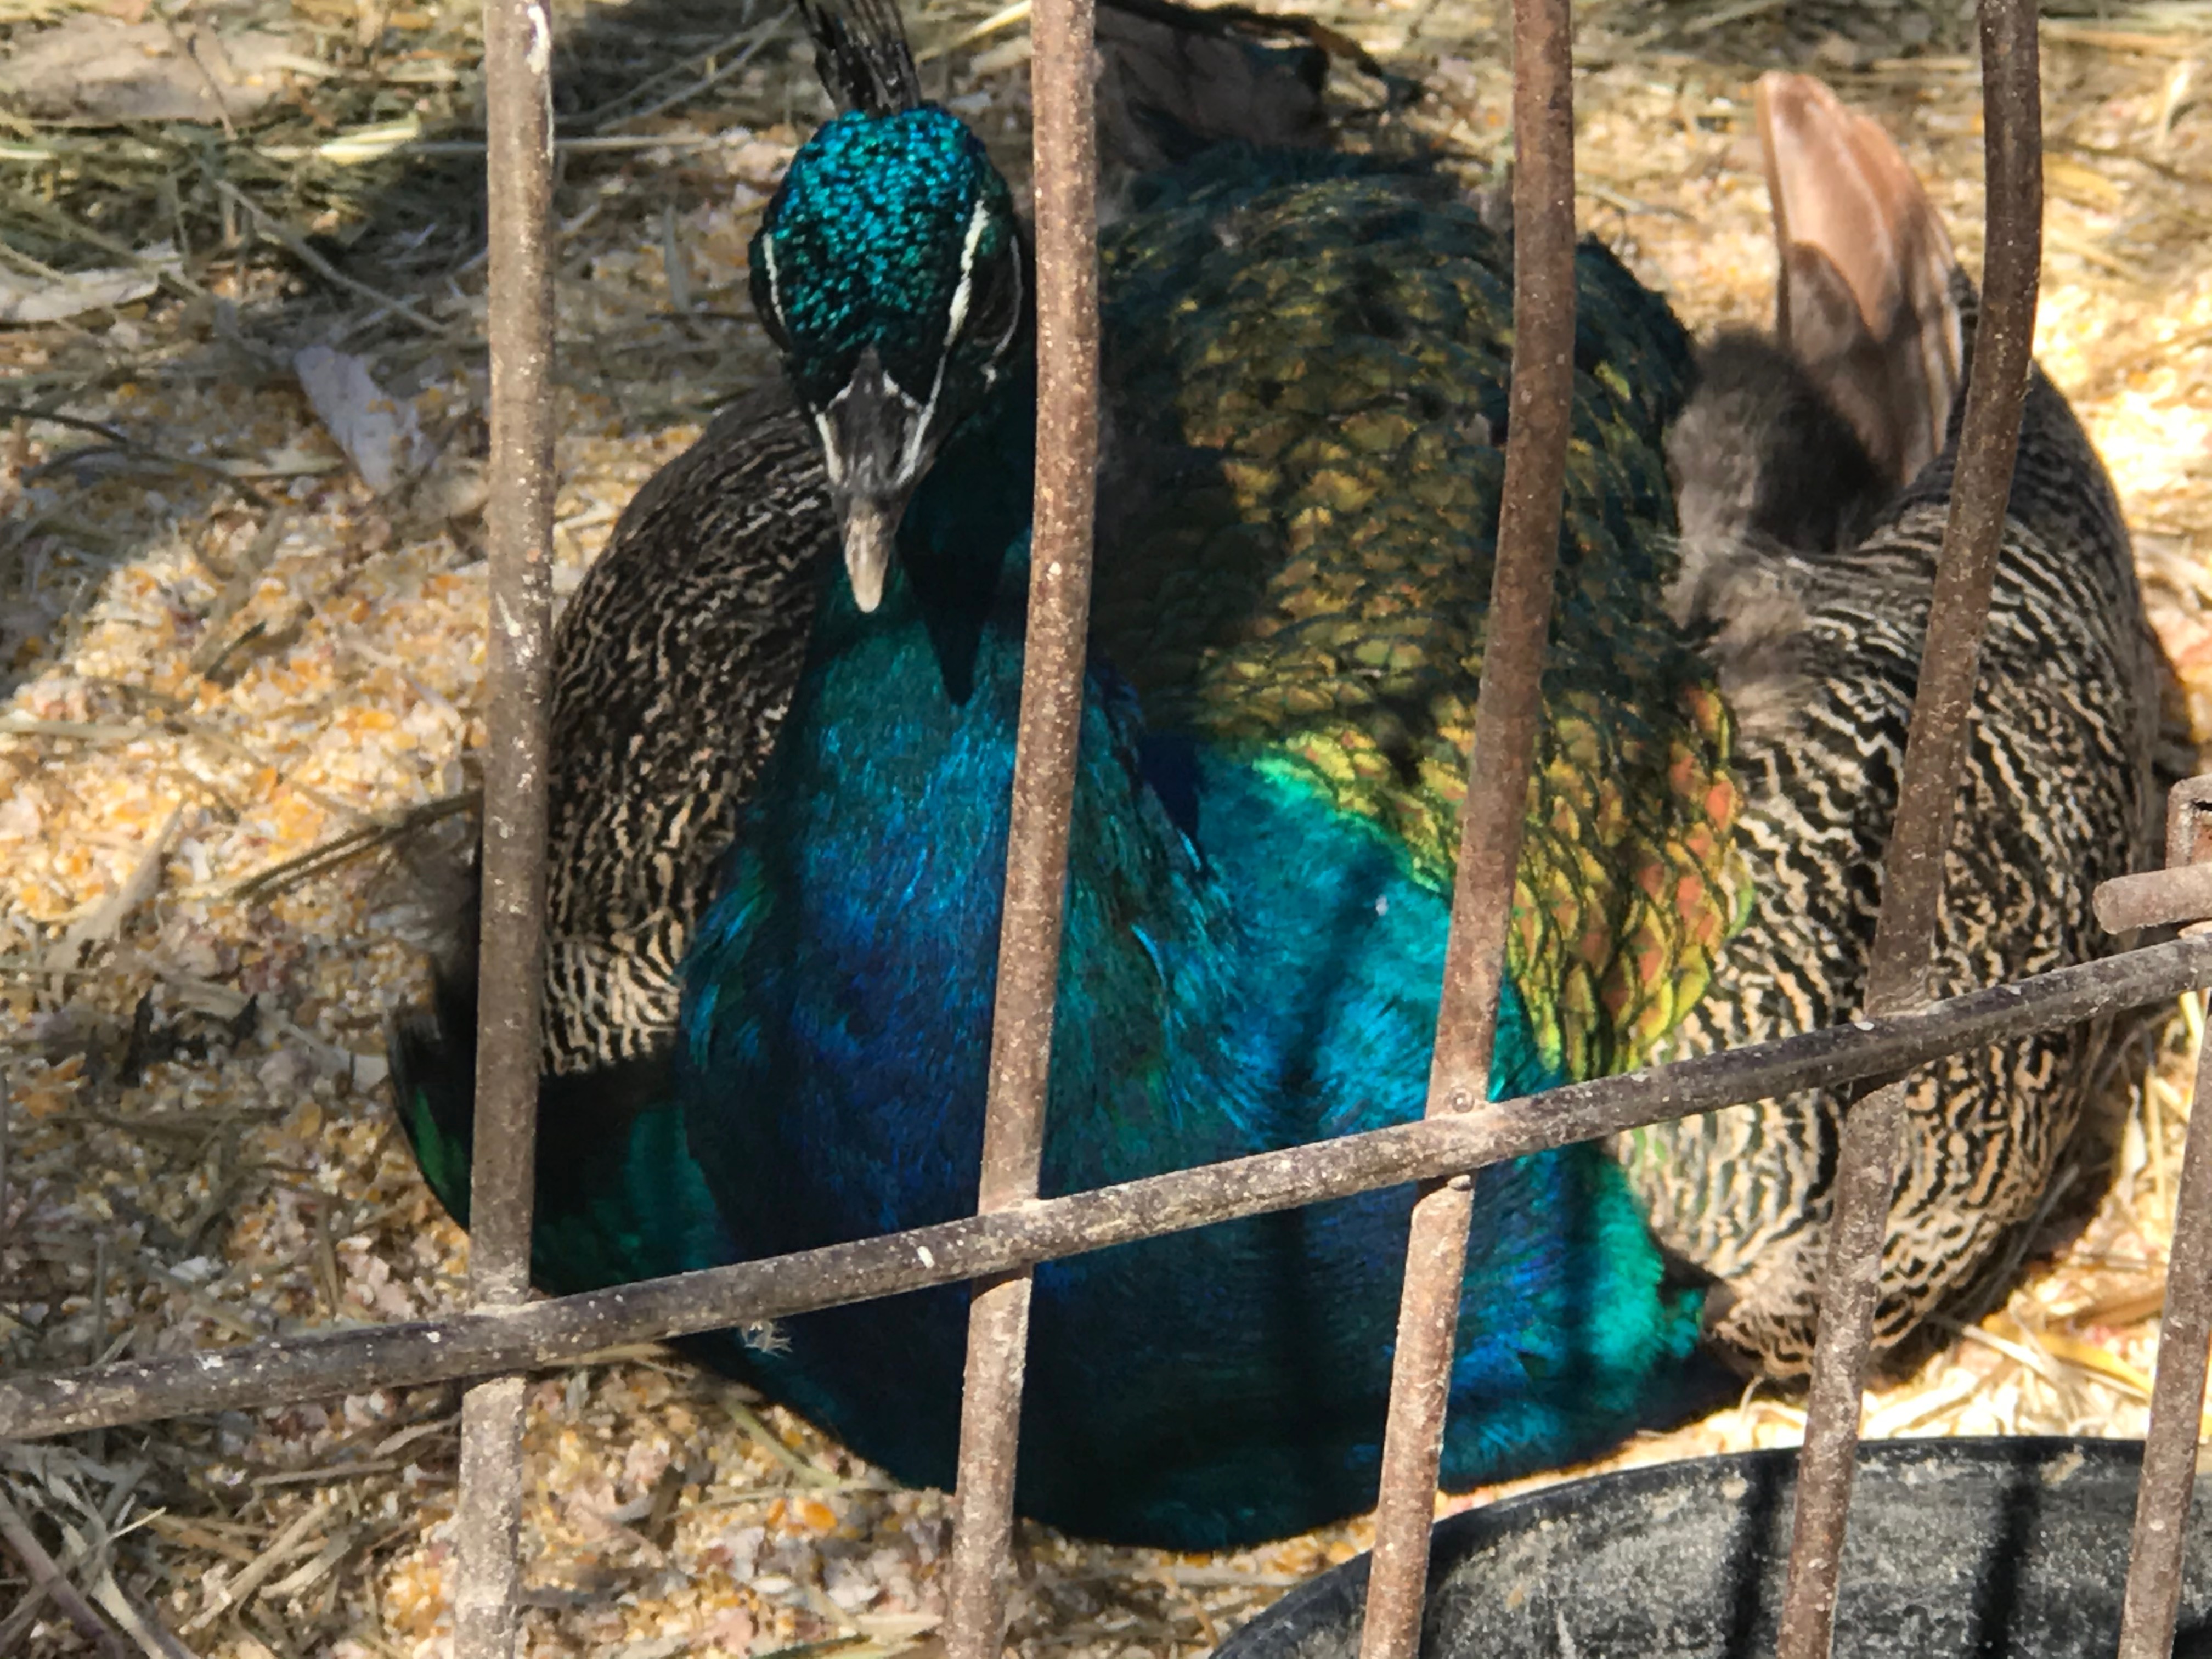 Pheasant in cage